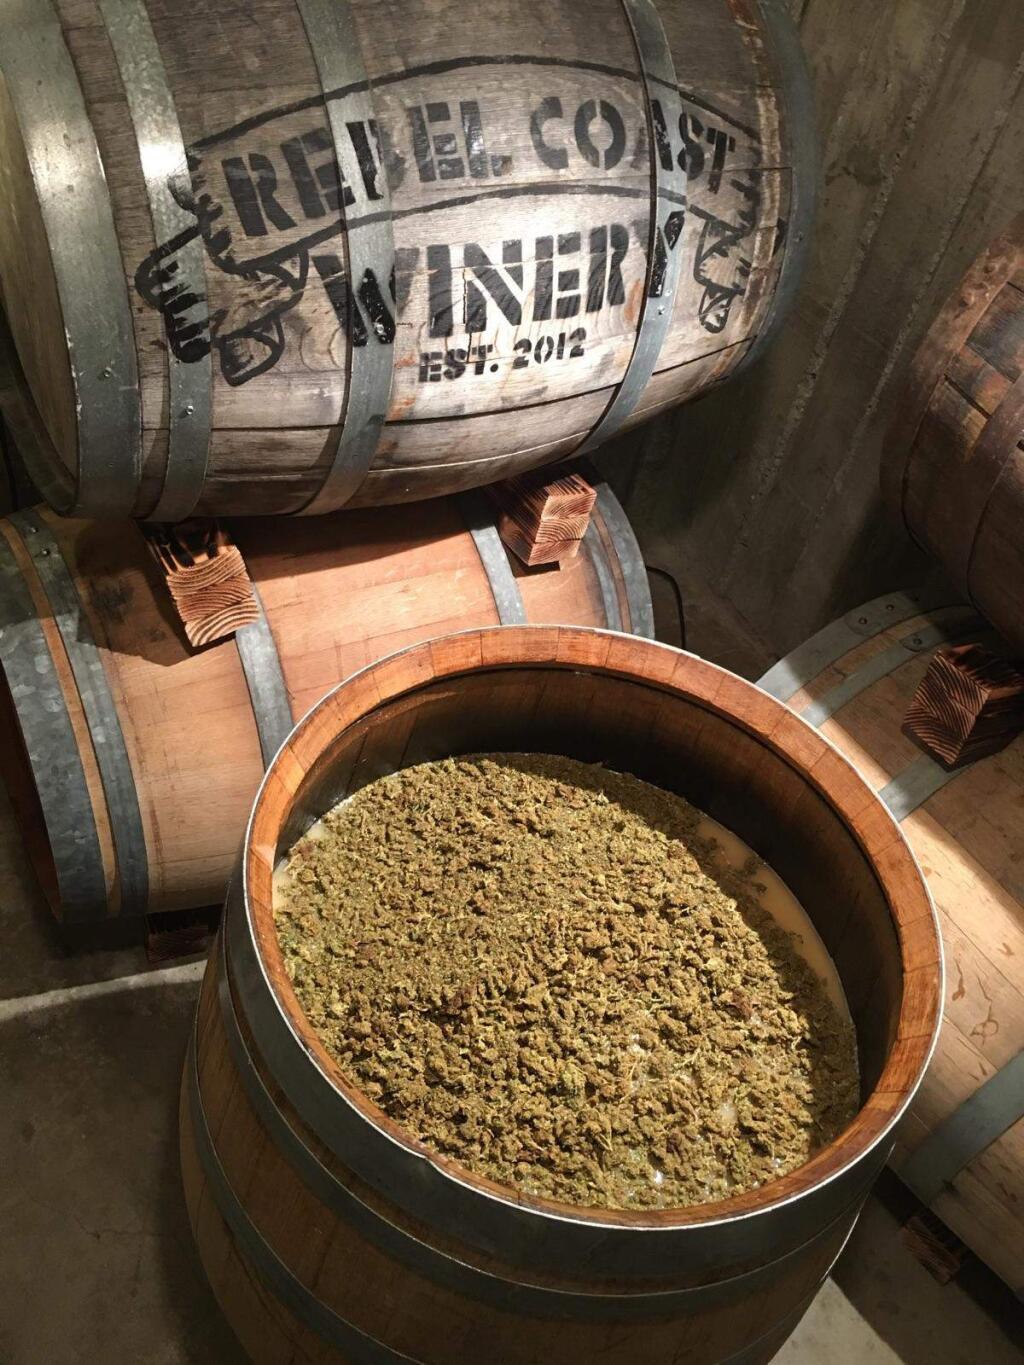 Rebel Coast Wine infuses a Sonoma Valley sauvignon blanc with oganic sativa flowers to create a 'green wine' which they hope to market widely in the state next year. (Chip Forsythe)